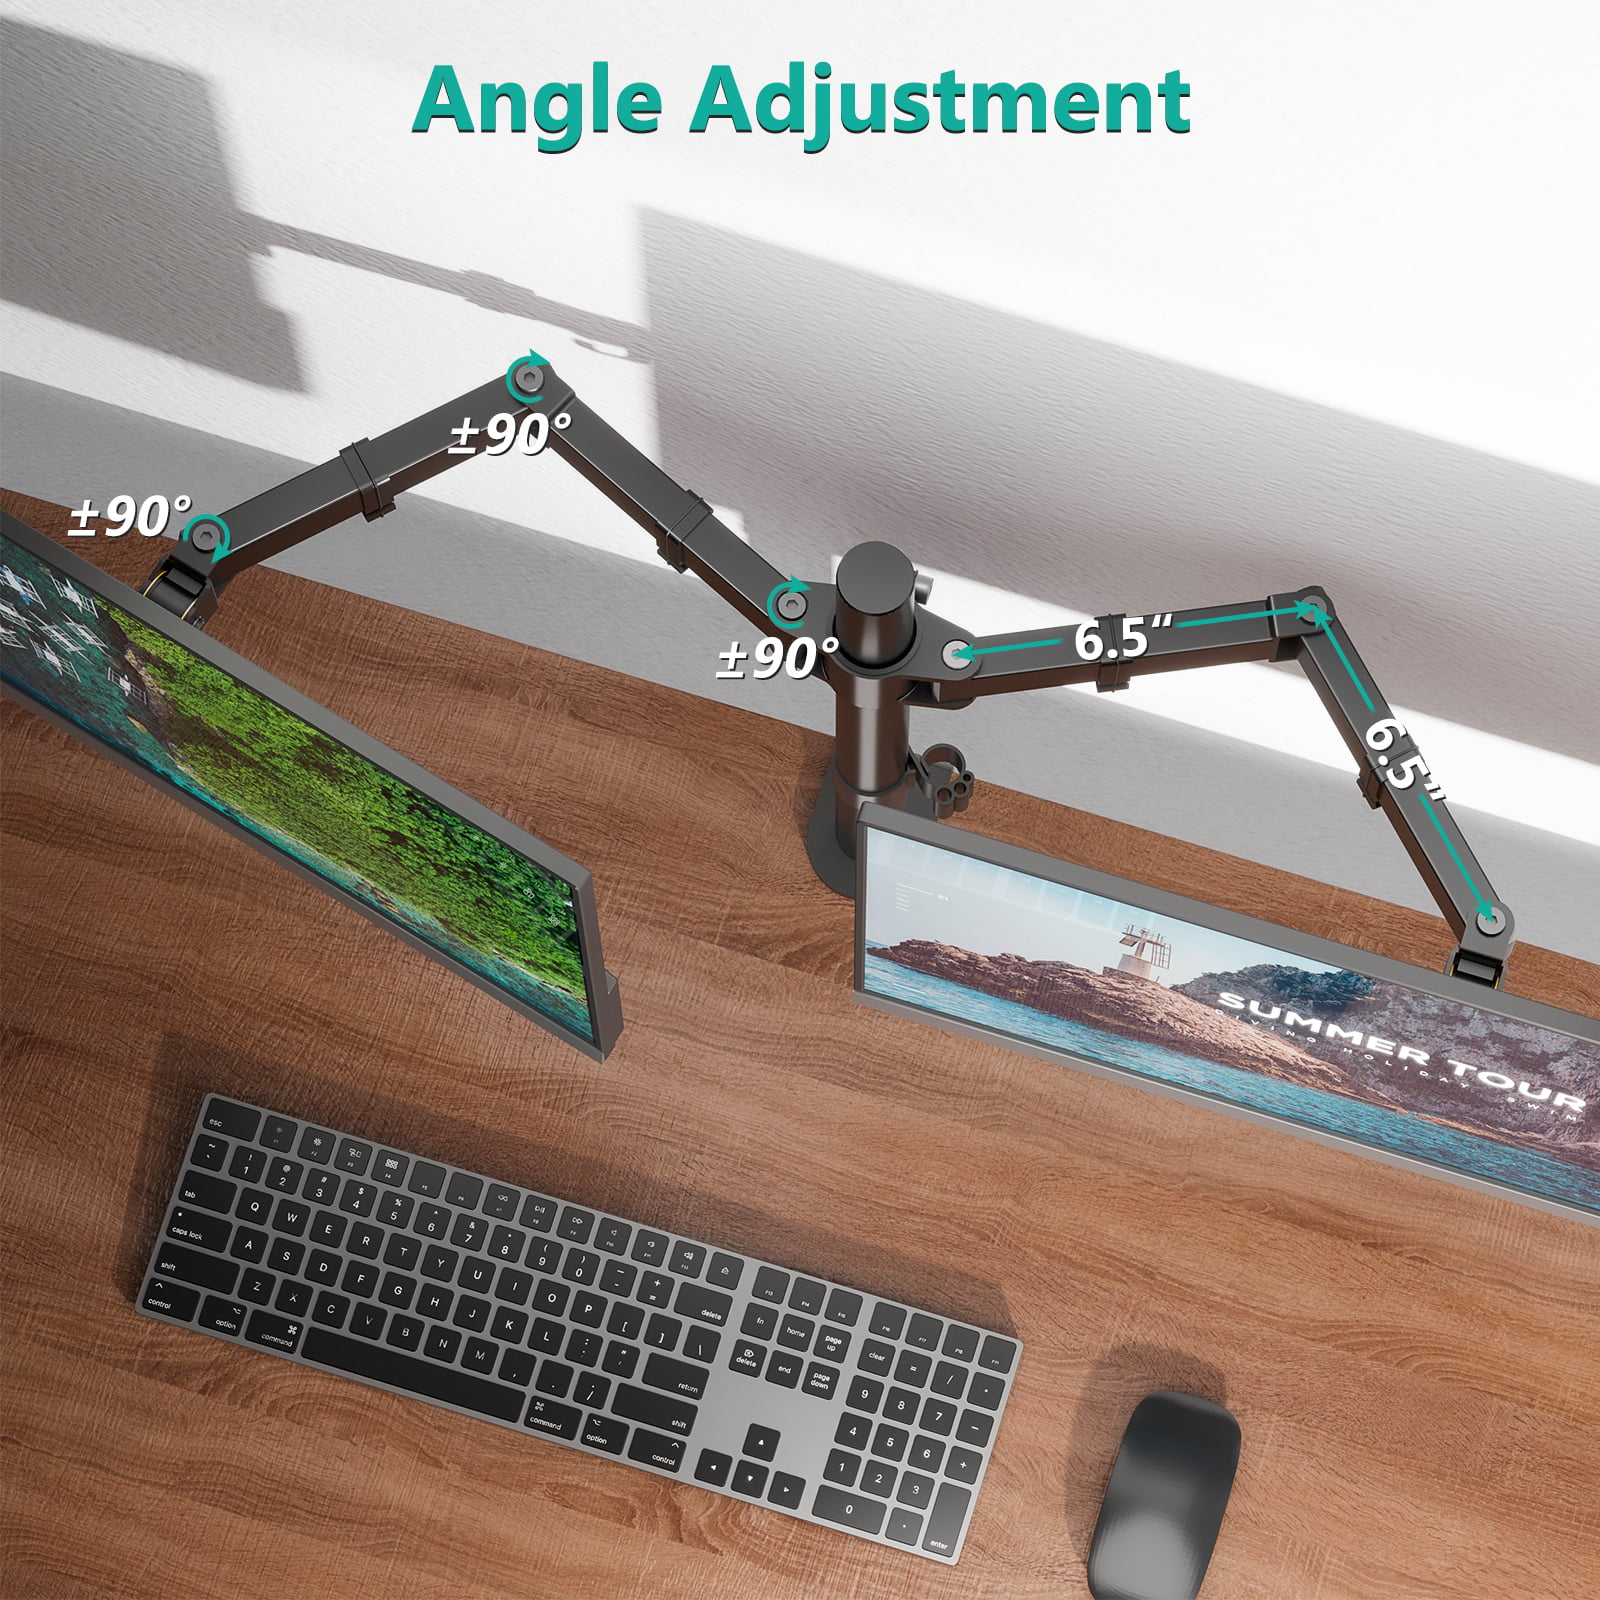 WALI Dual LCD Monitor Fully Adjustable Desk Mount Stand Fits 2